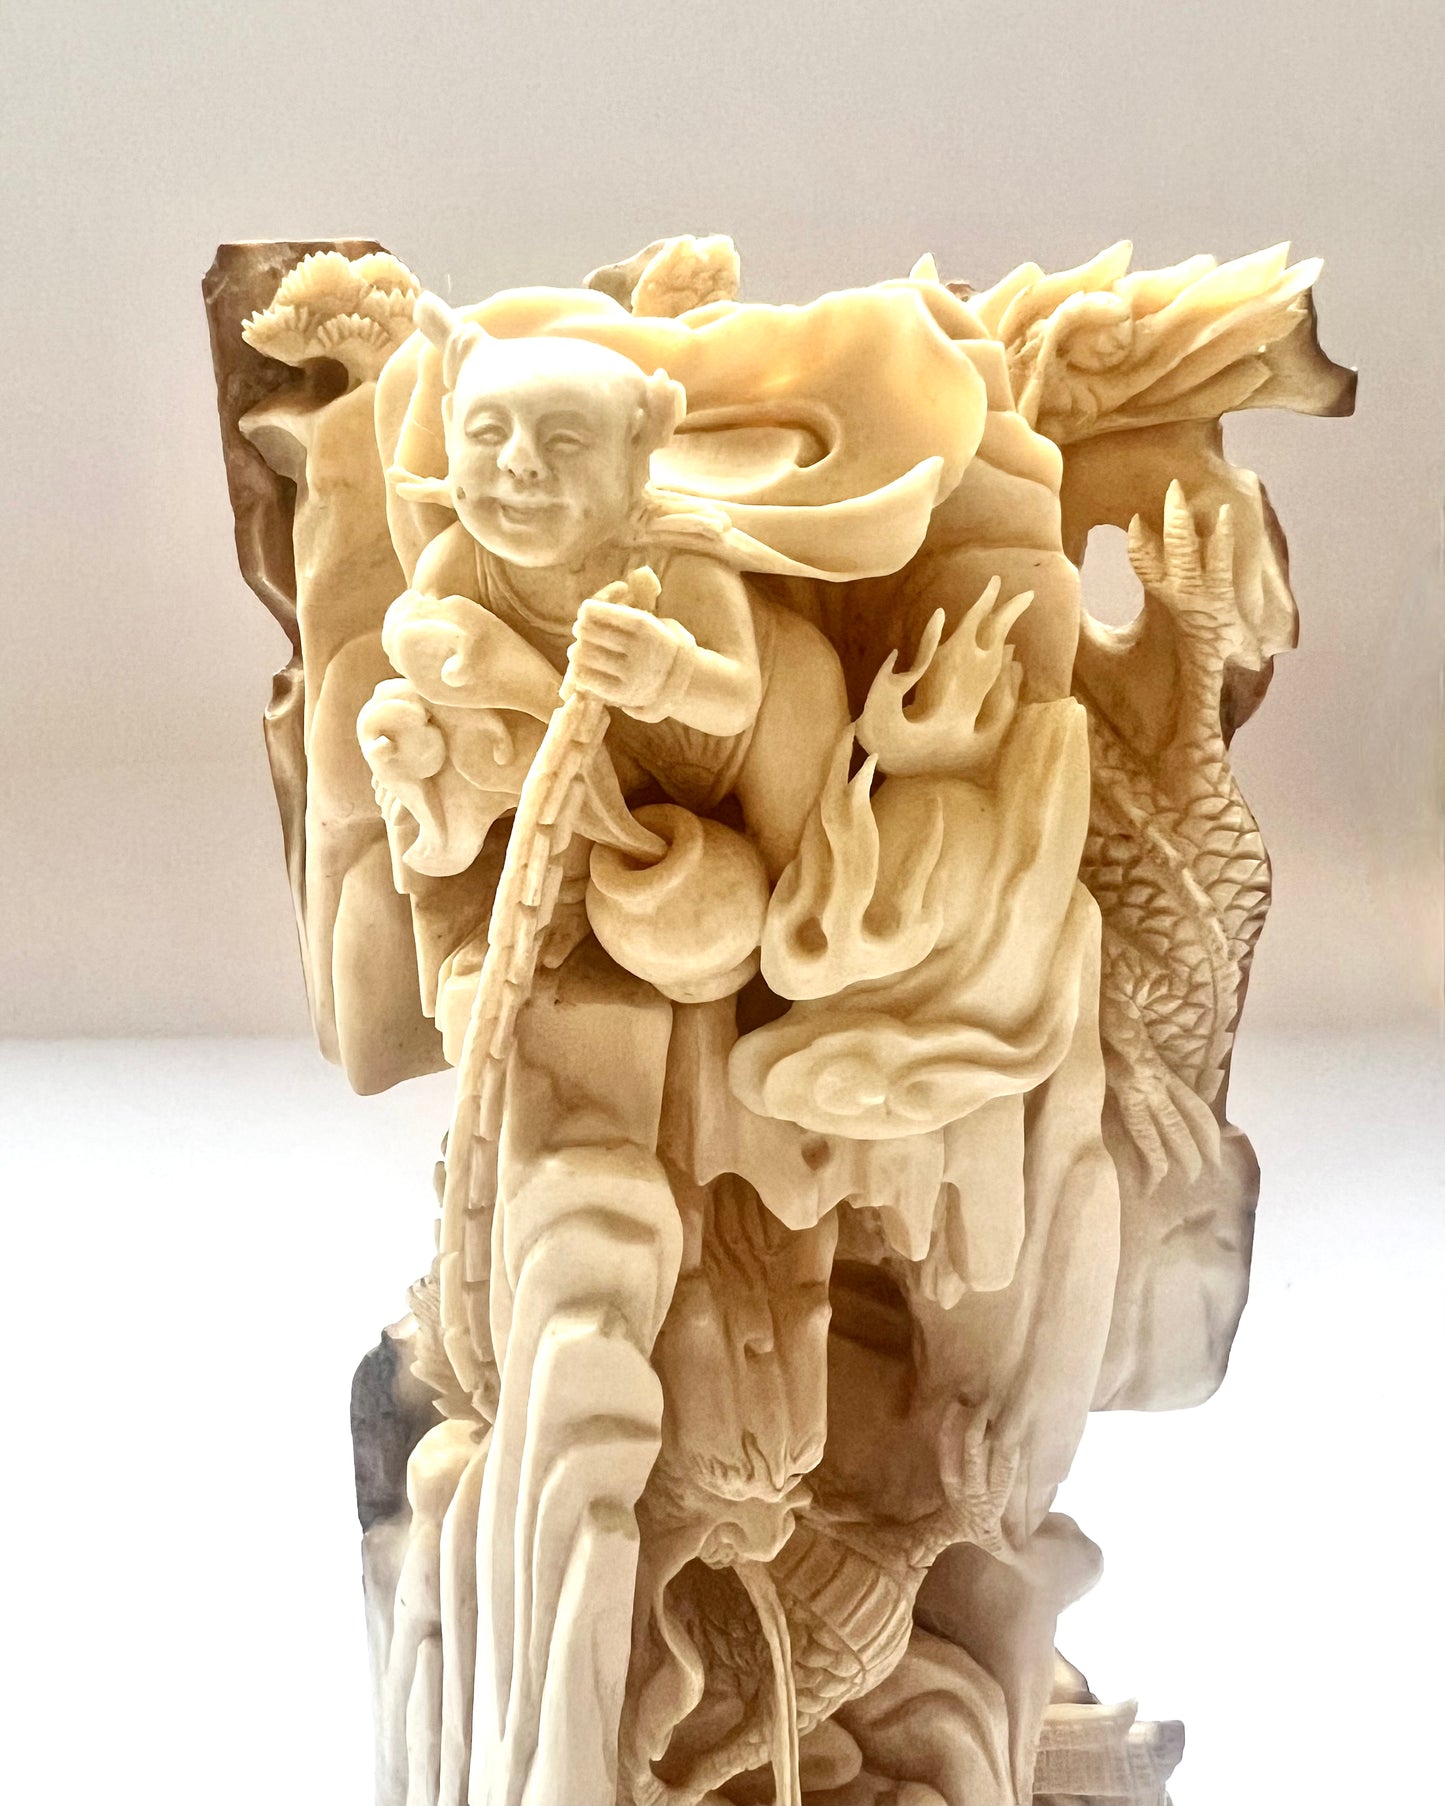 Early to mid 19th century Qing dynasty ivory carving of Nezha subduing Ao Guang, the Dragon King of the East Sea